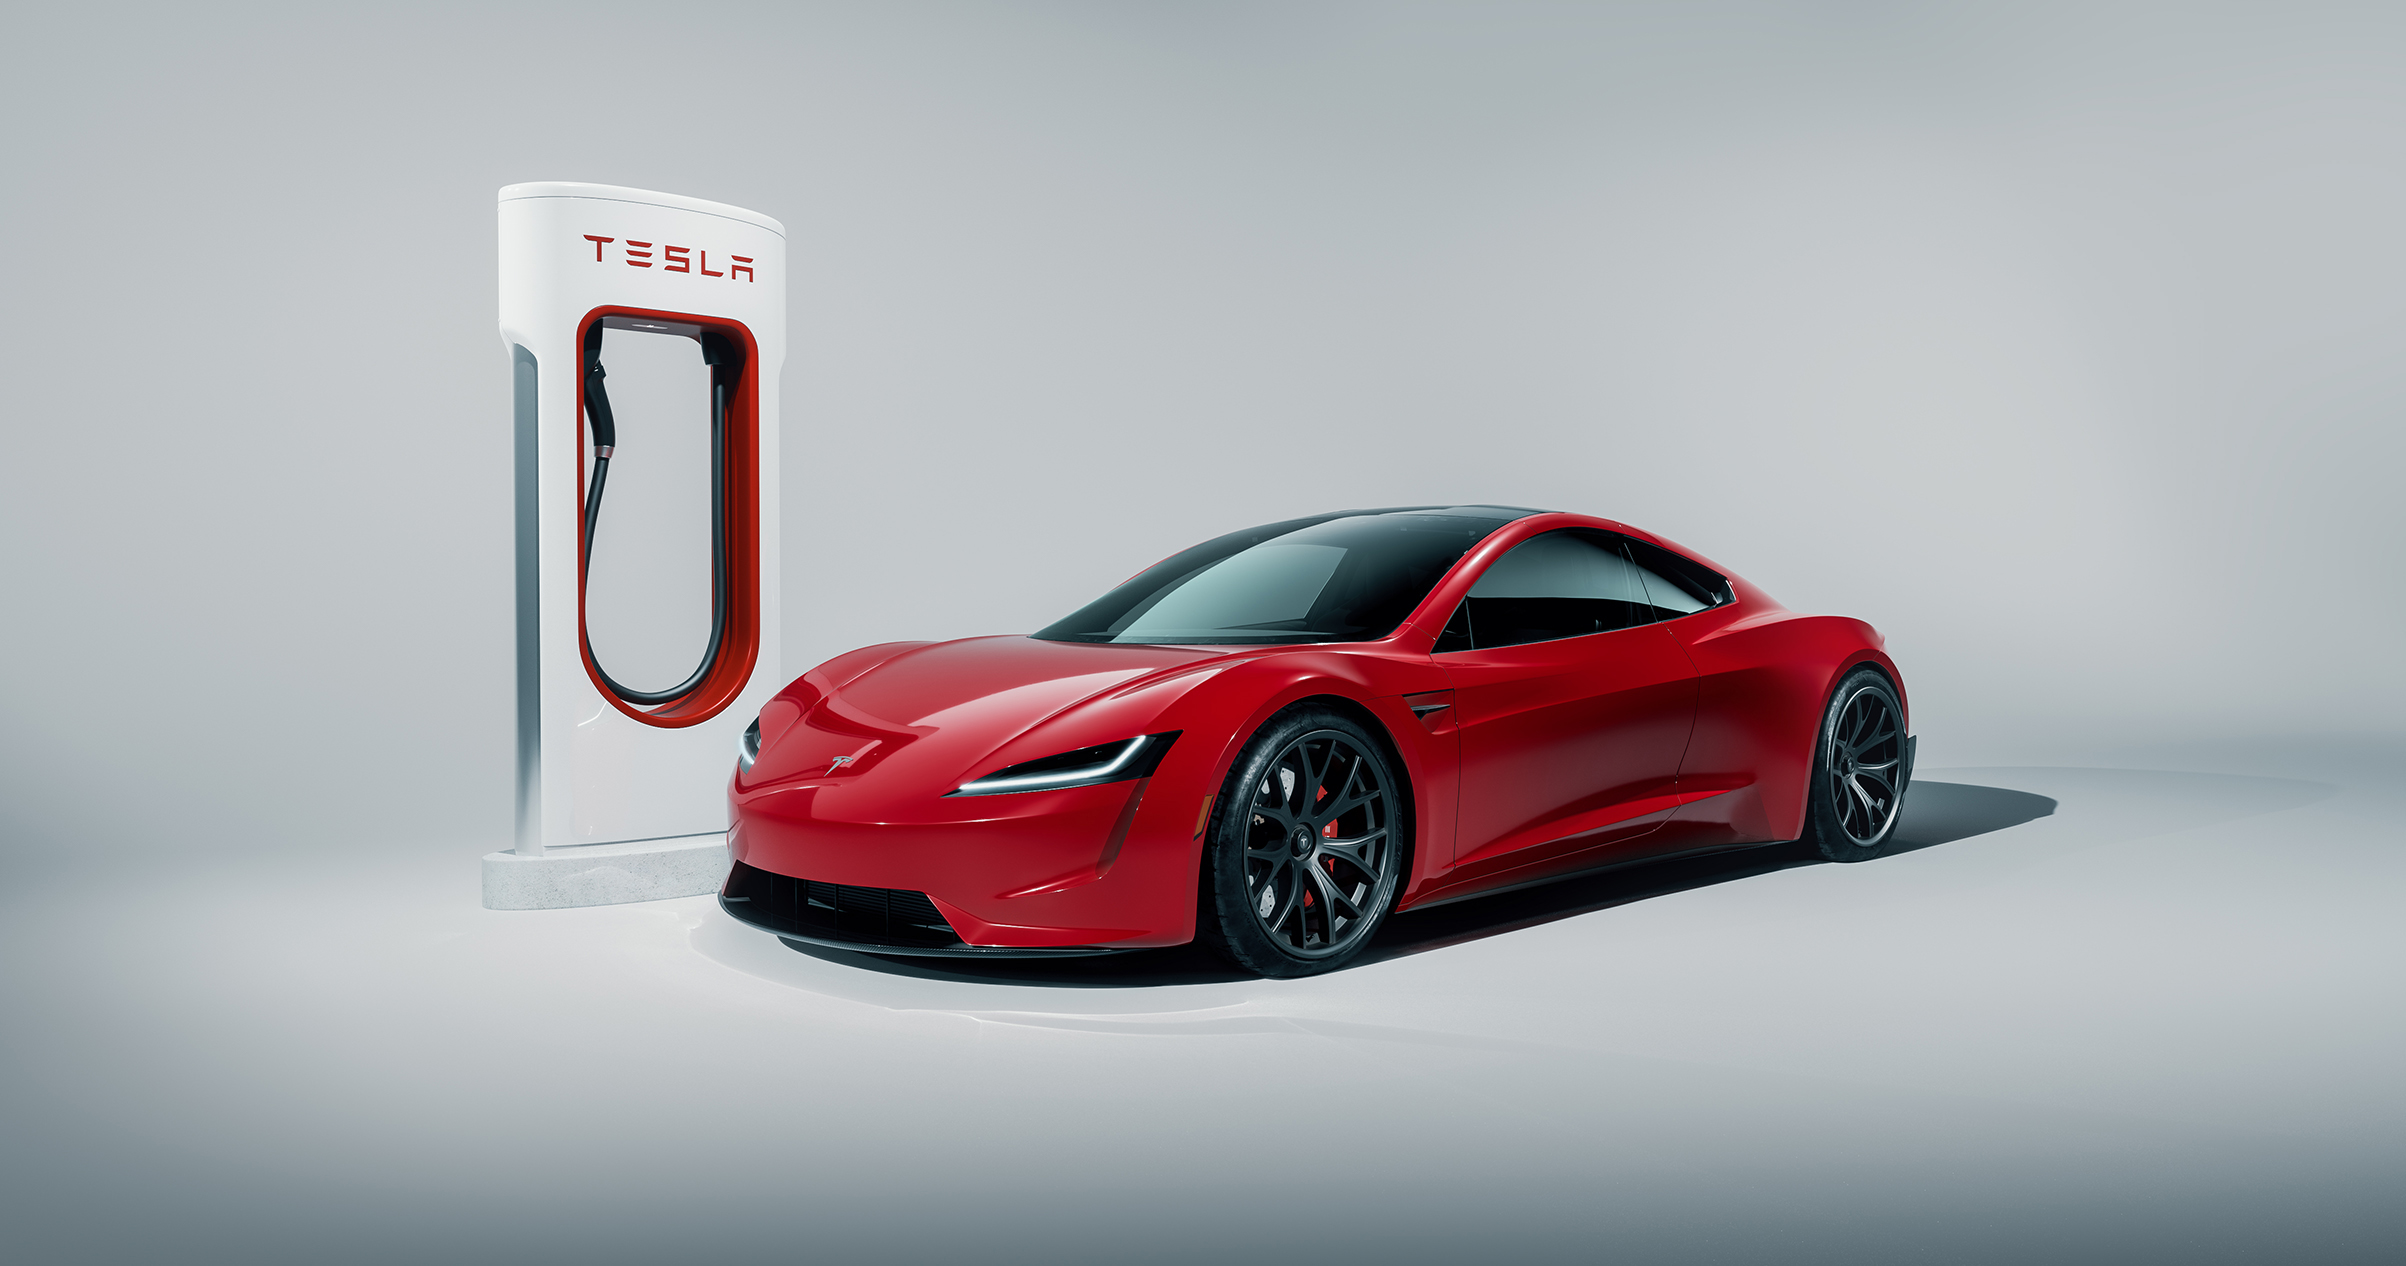 Elon Musk wants his Tesla Roadster to Hover 